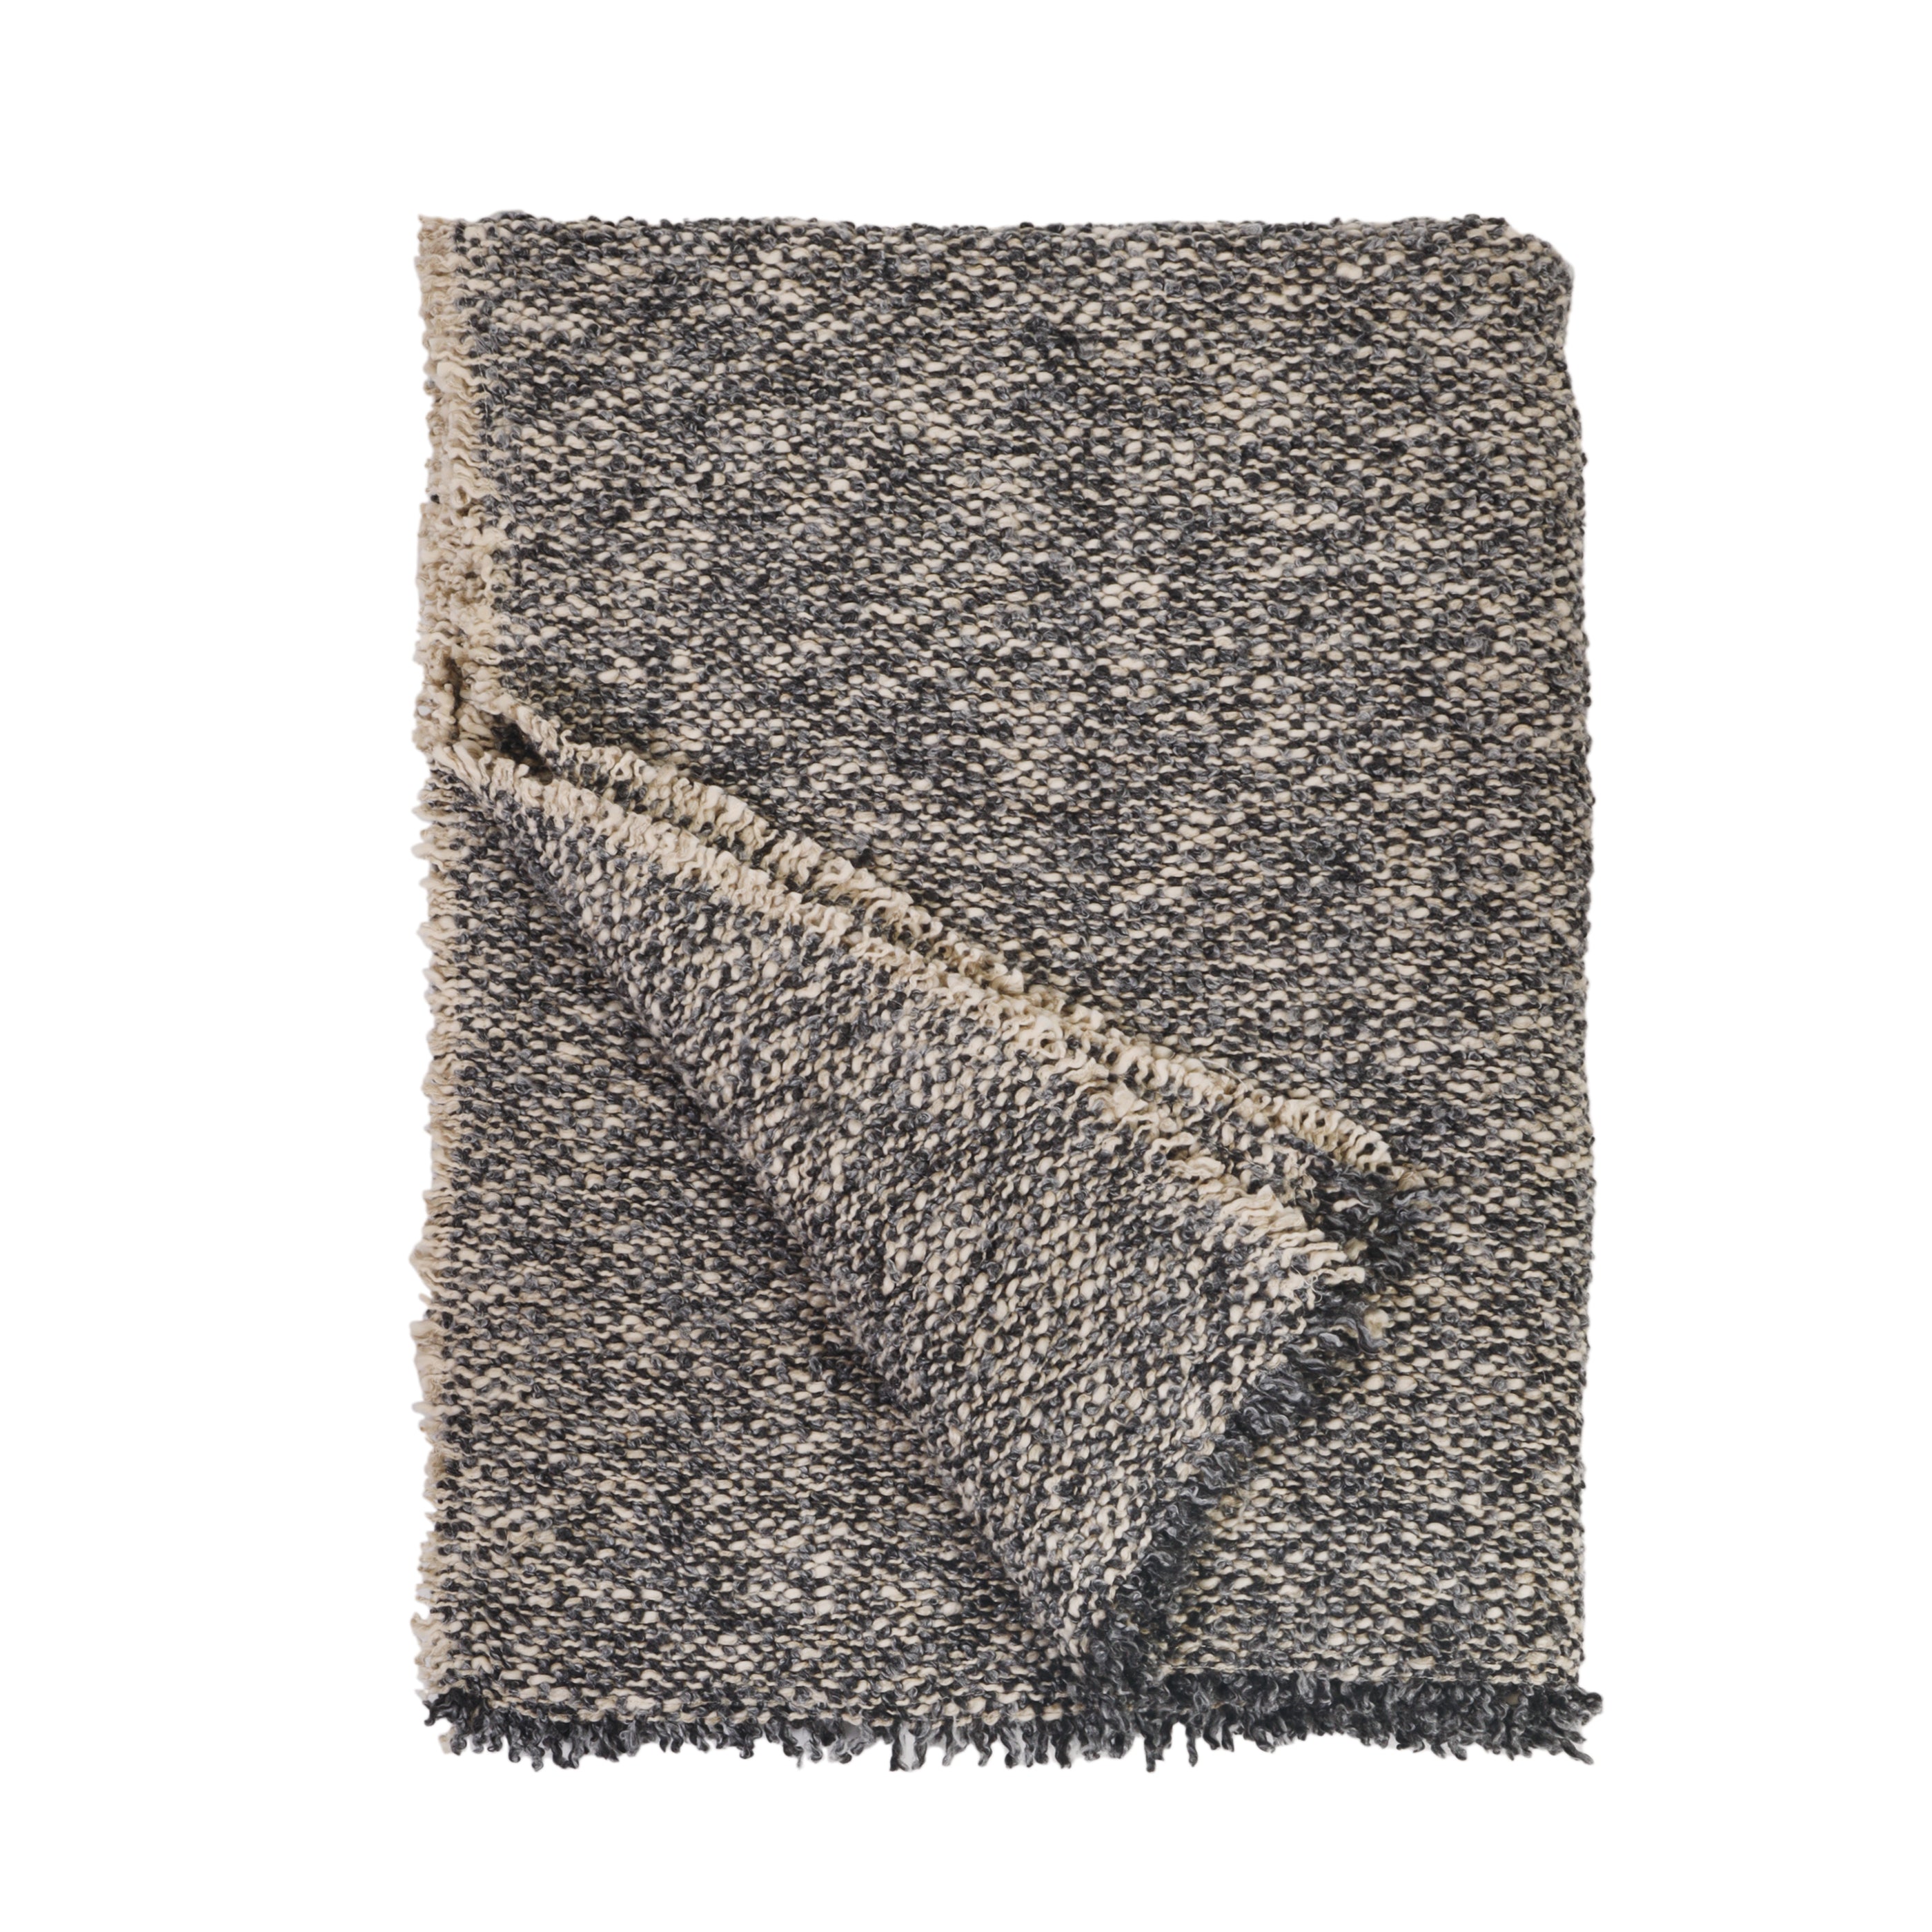 pompom at home - brentwood - throw - steel color